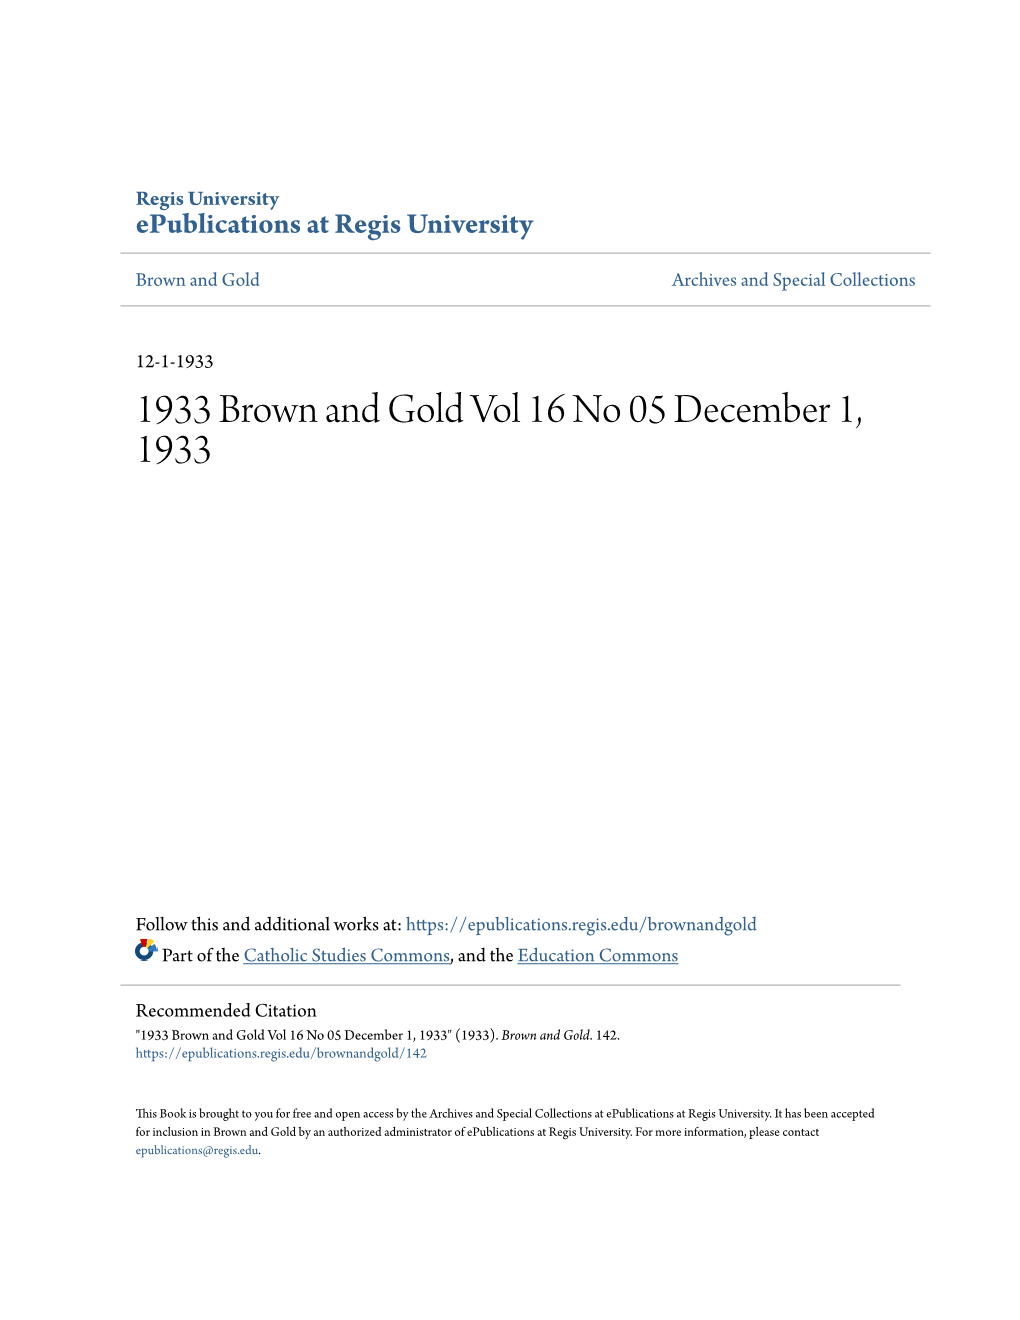 1933 Brown and Gold Vol 16 No 05 December 1, 1933